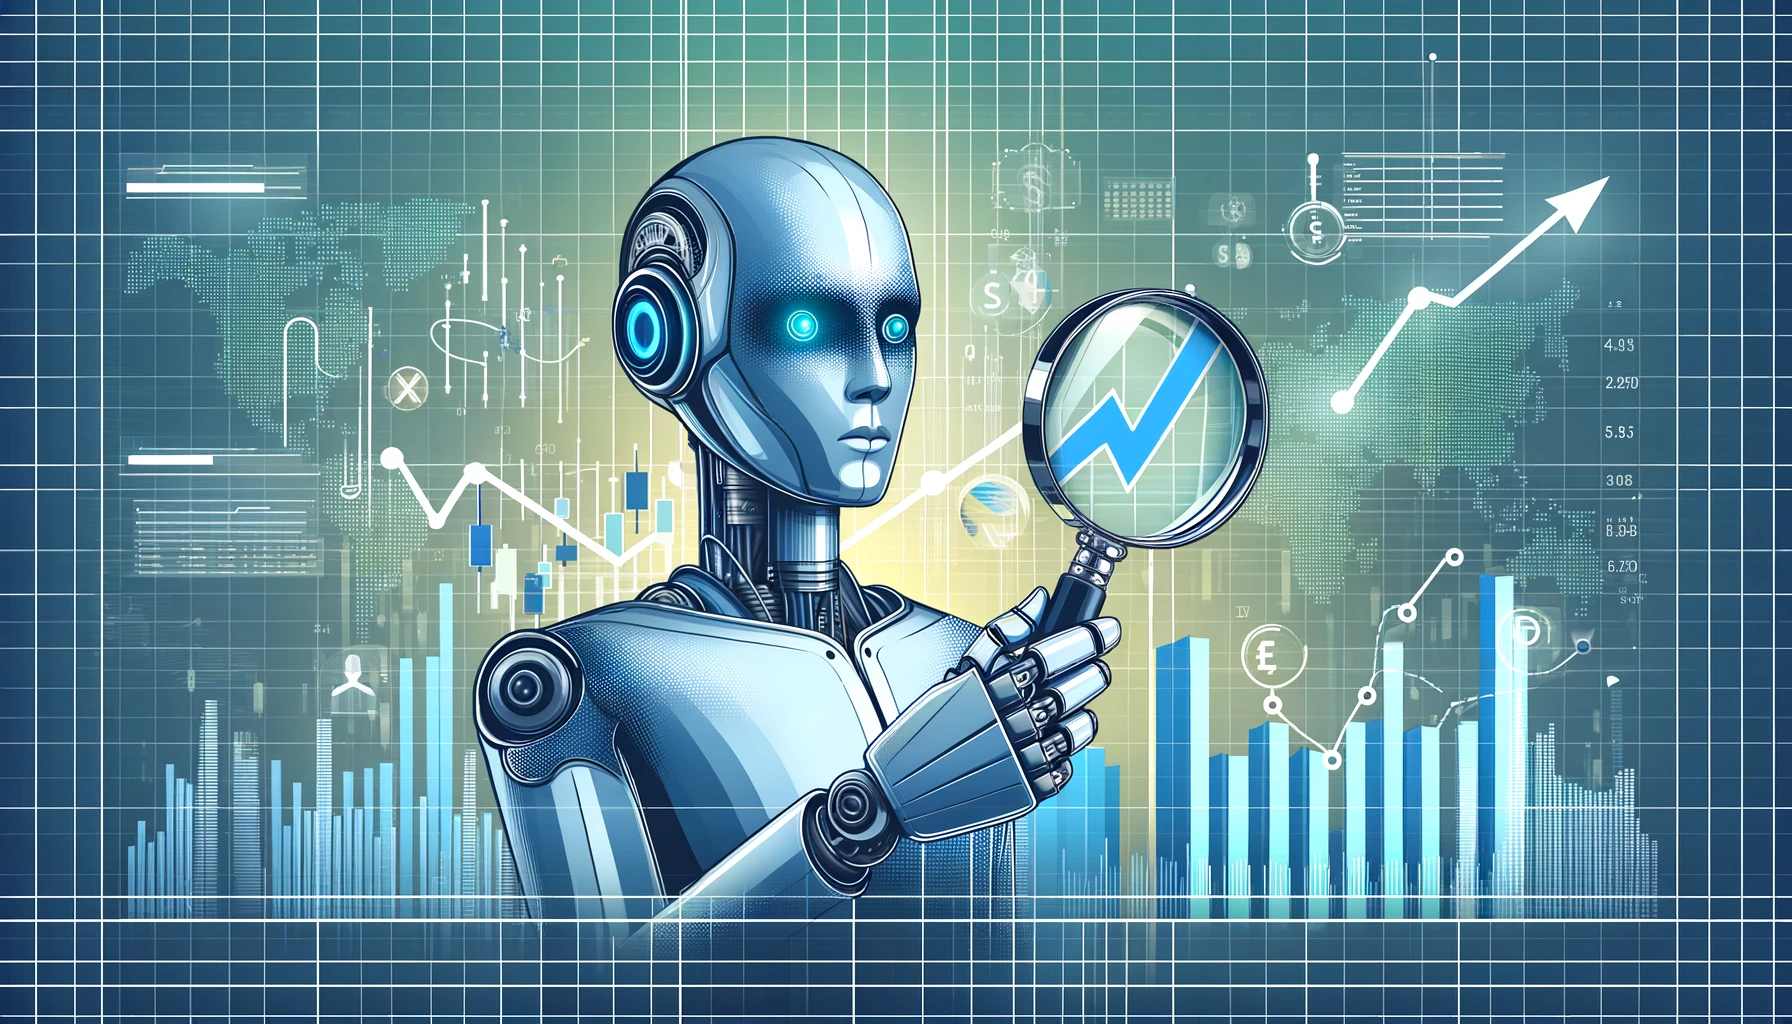 AI Surpasses Human Performance in Financial Analysis